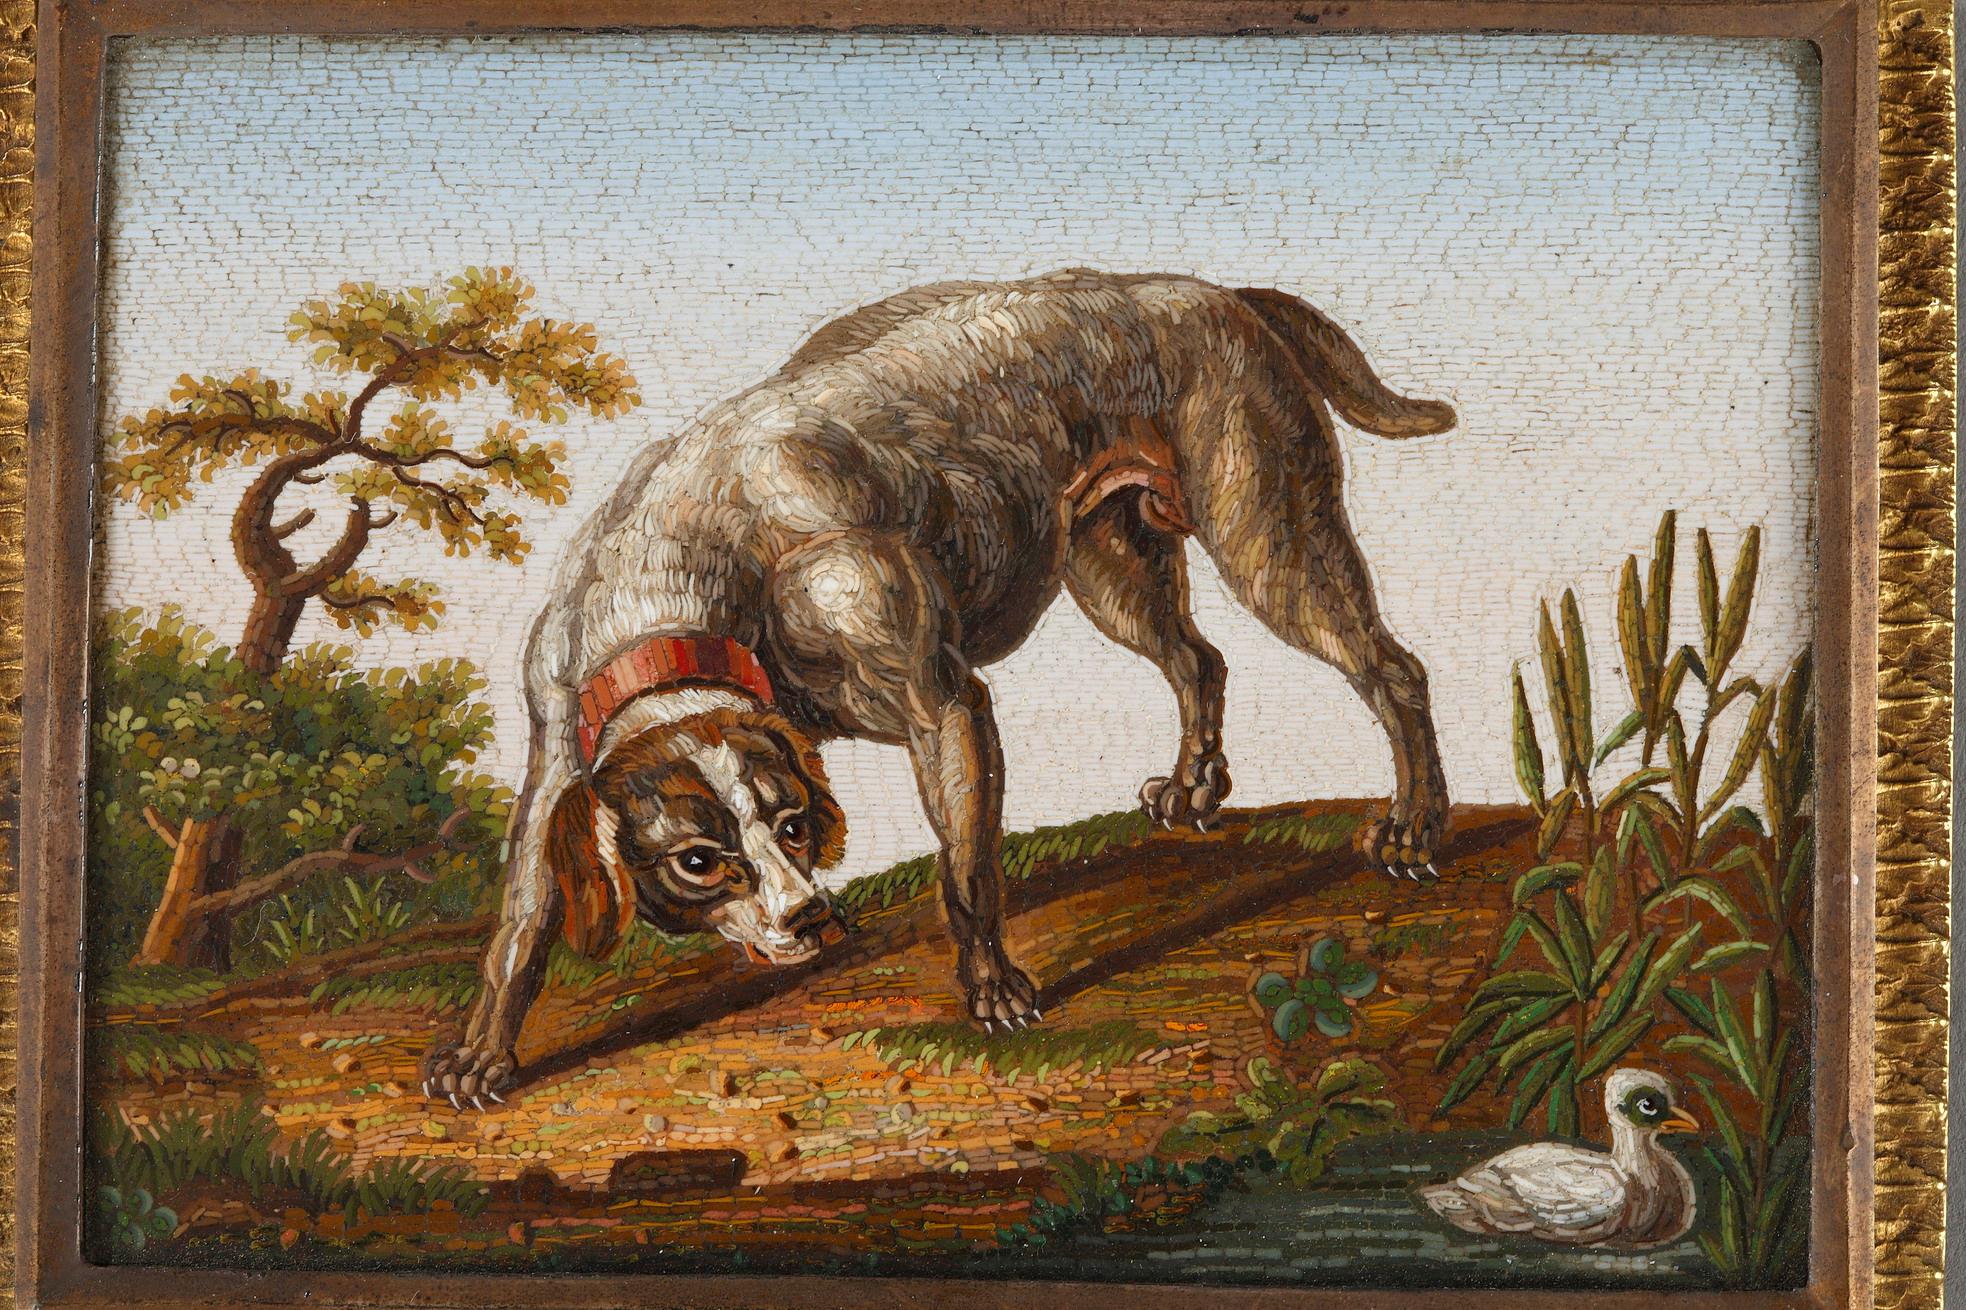 Large micro-mosaic plate depicting a dog with a red collar chasing a duck beside the Tiber river. After Gioachhino Barberi. The Barberi family was a very famous family of Roman mosaicists very much in demand by the European aristocracy. They are